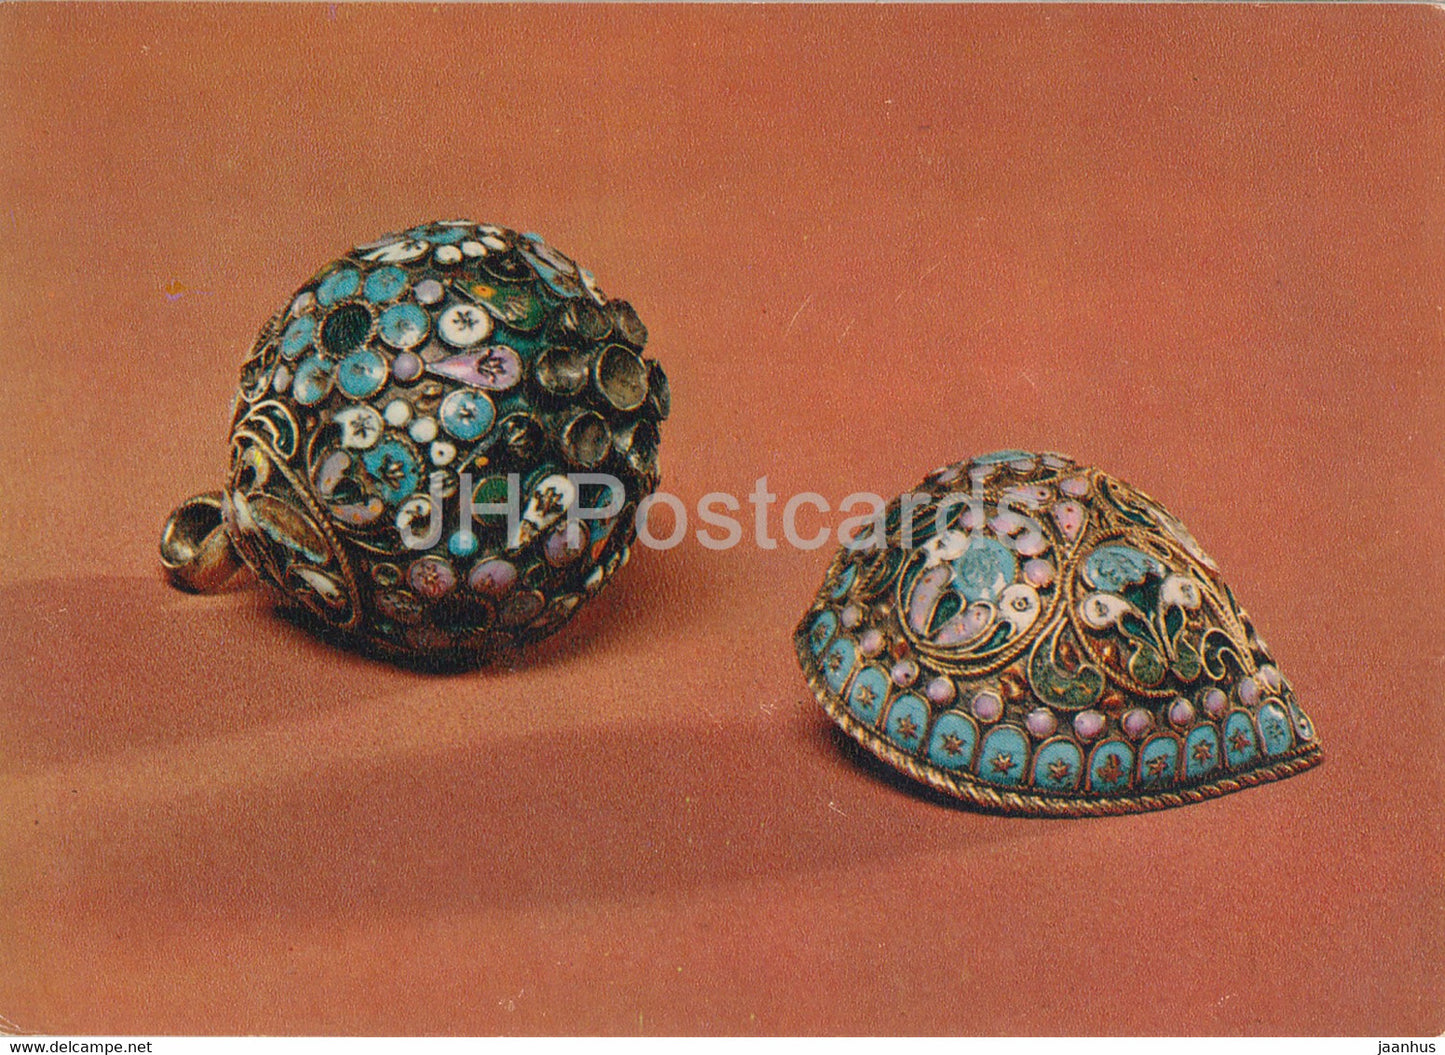 Buttons - Applied Art in Moscow Kremlin Museum - 1978 - Russia USSR - unused - JH Postcards